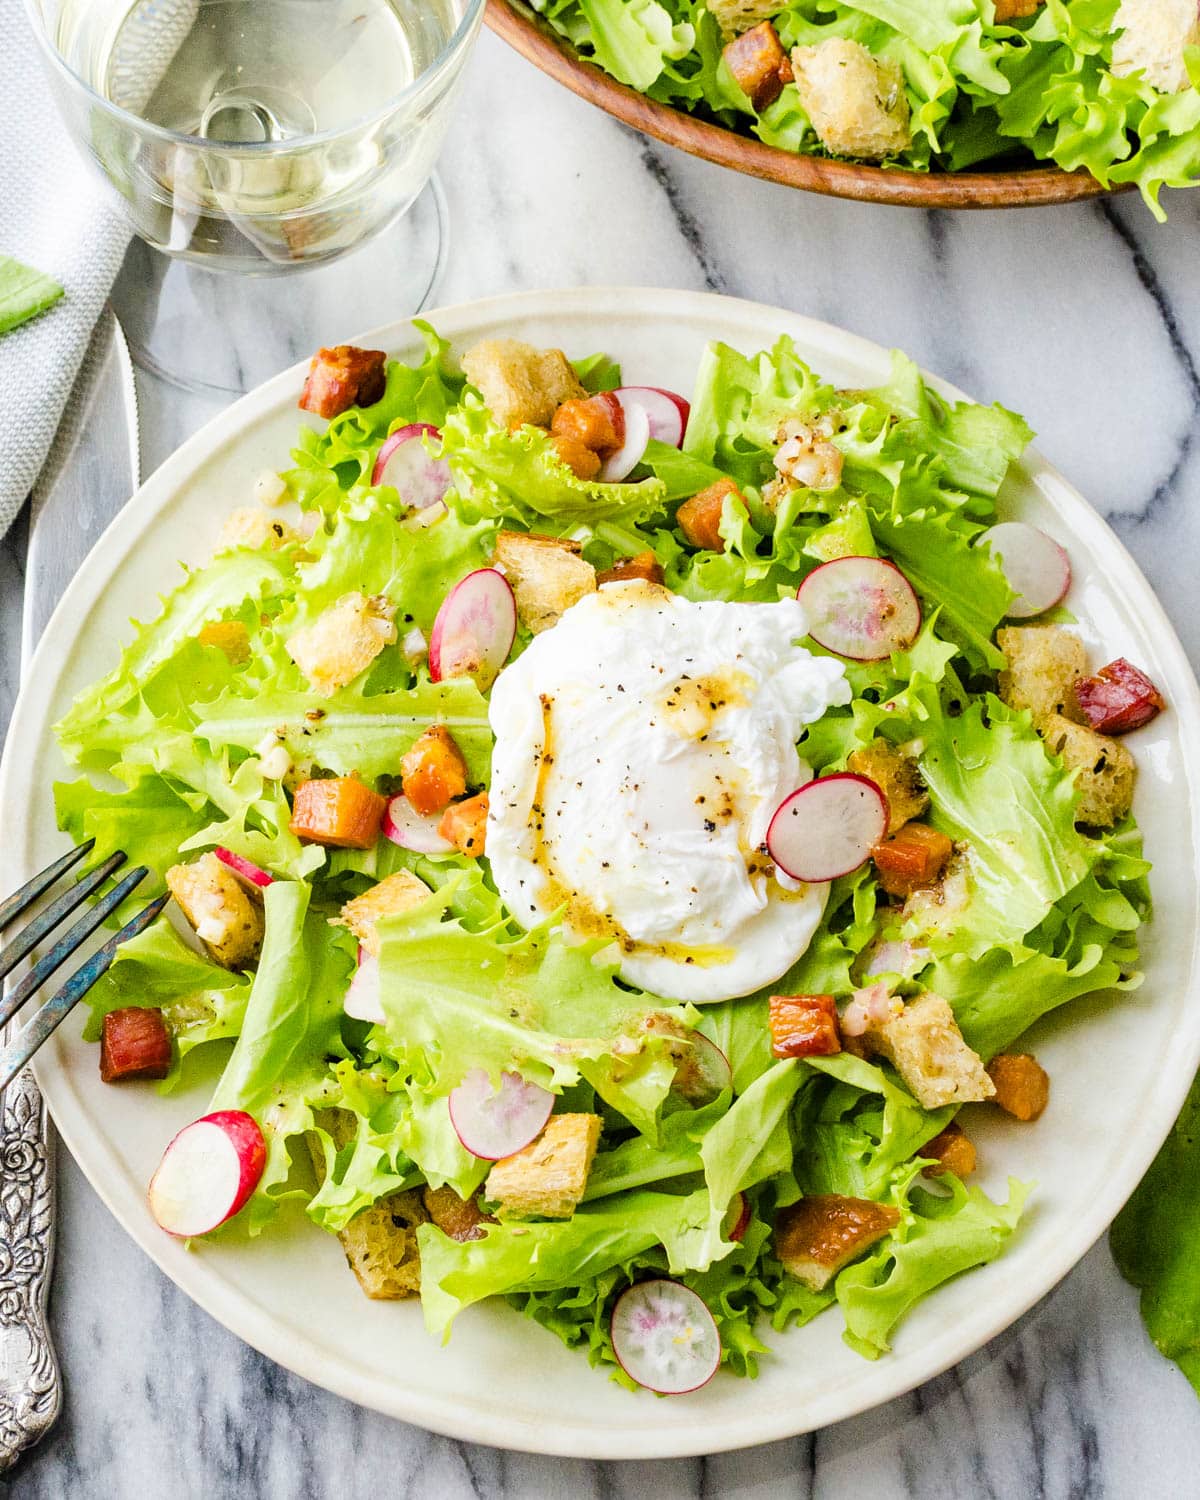 Frisee lardons salad with poached eggs and croutons.